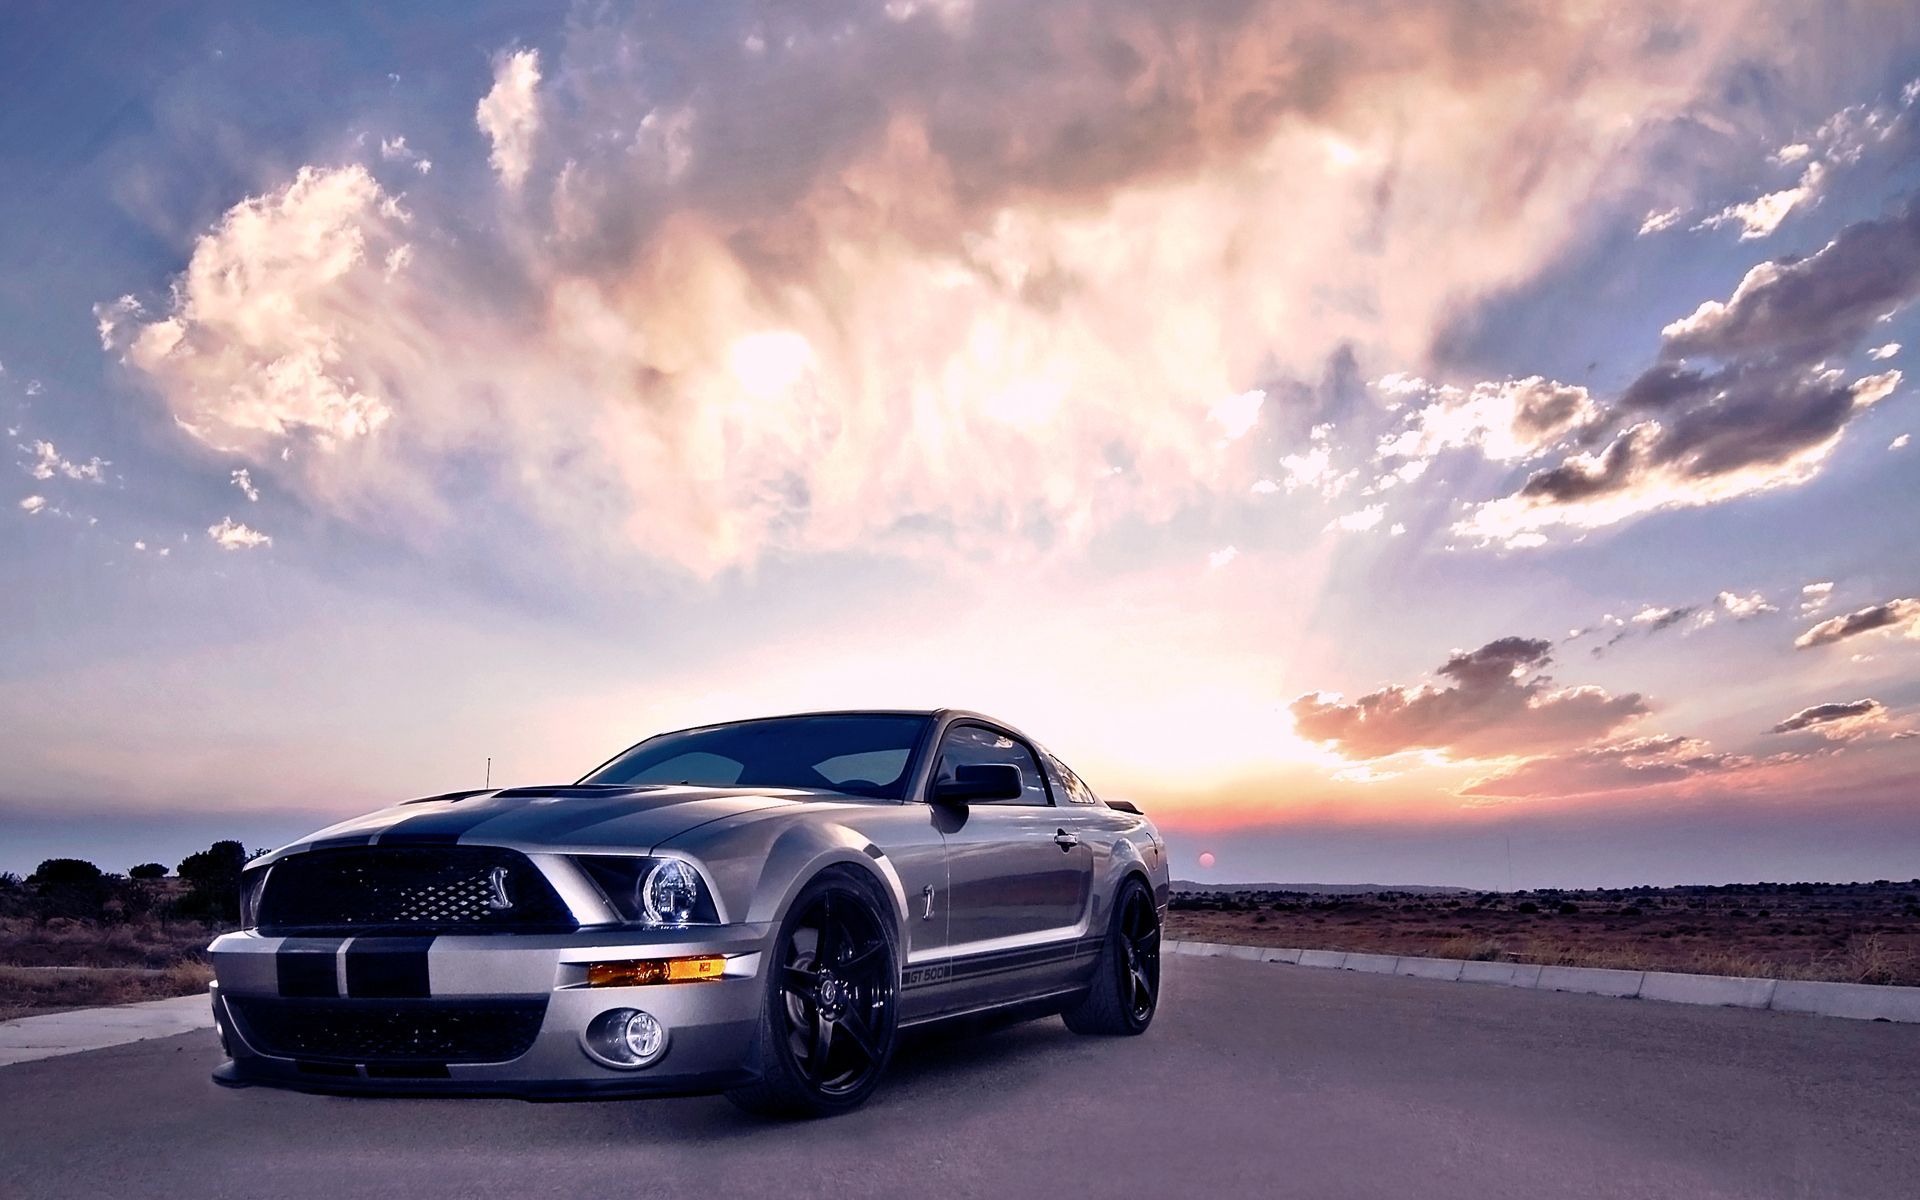 Excellent Ford Mustang Shelby Wallpaper Full HD Pictures